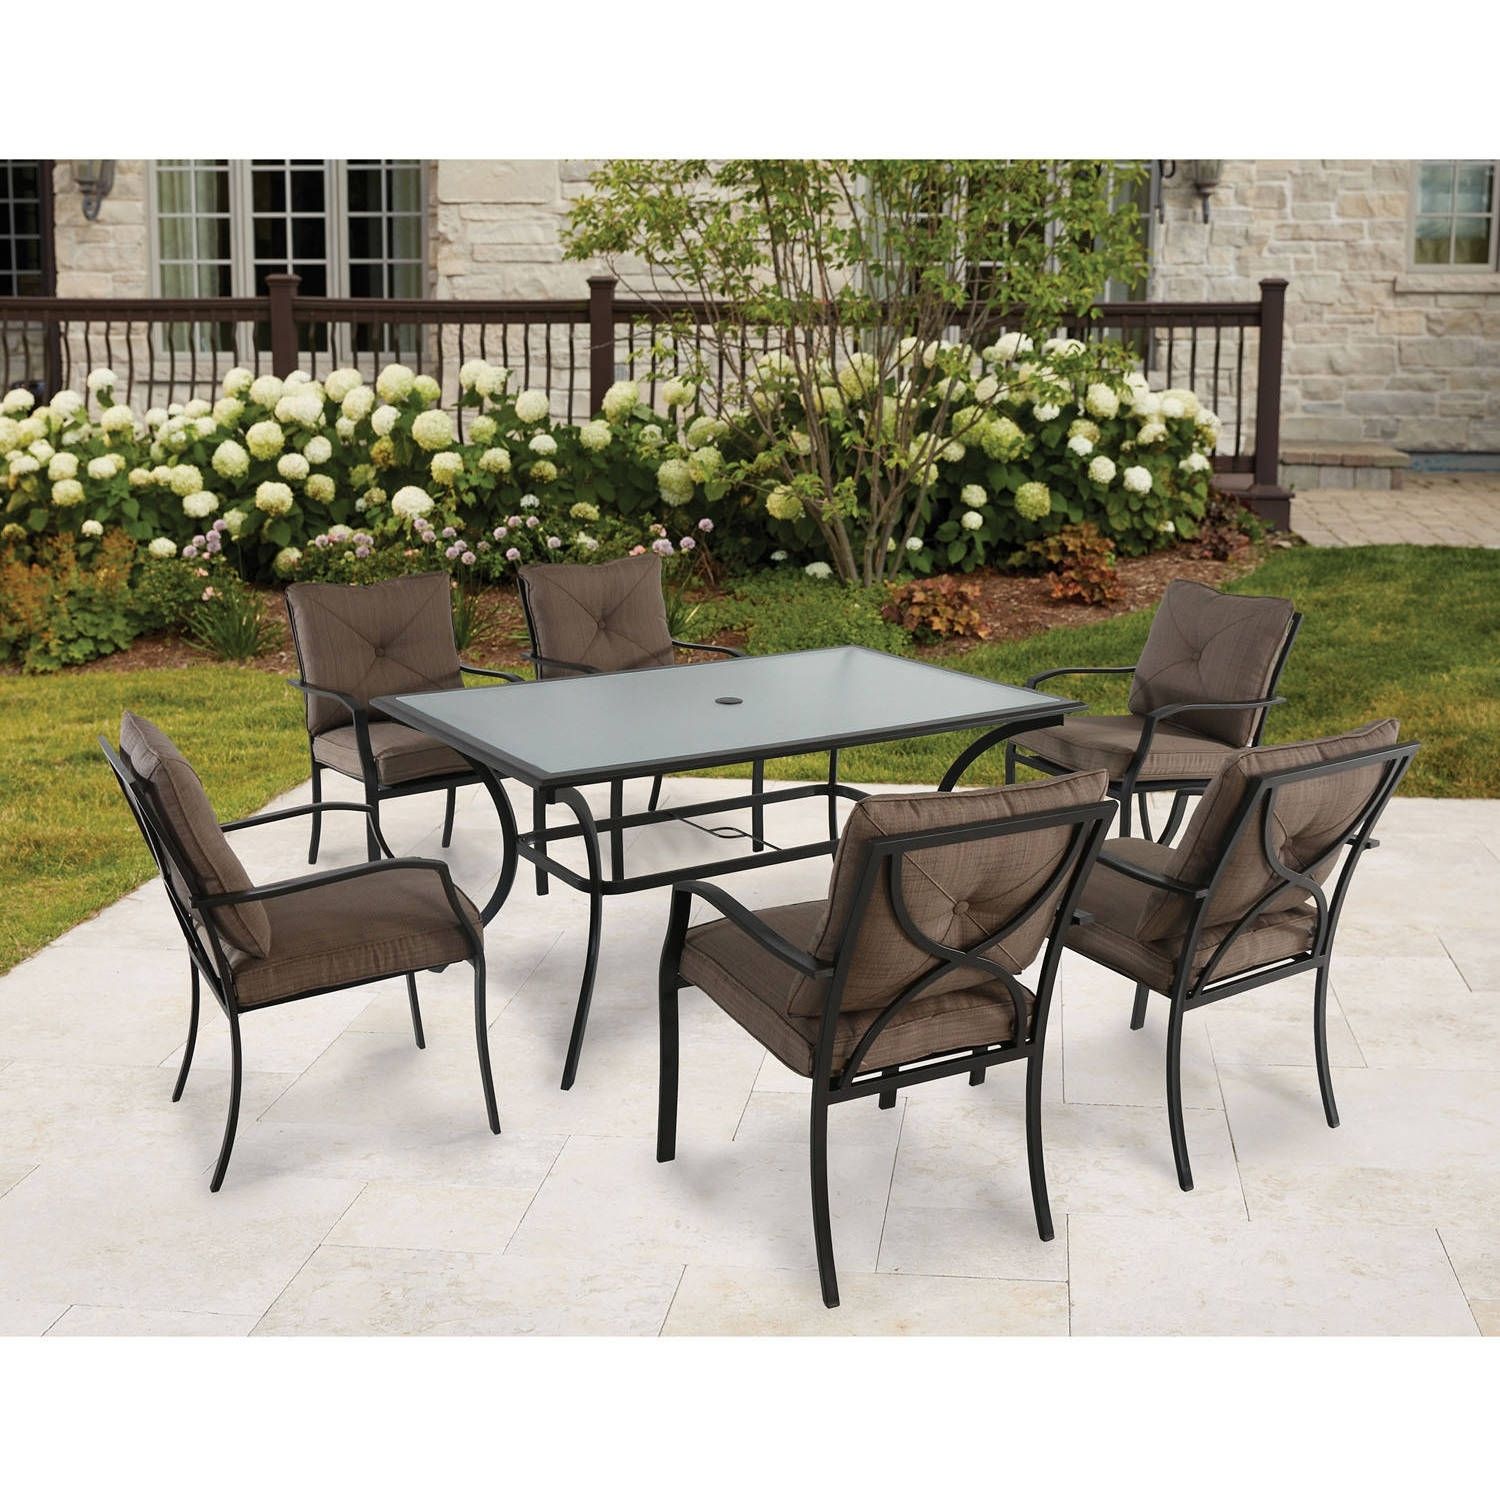 Cambridge Crawford 7 Piece Outdoor Dining Set – Walmart With Regard To Current Crawford 7 Piece Rectangle Dining Sets (View 9 of 20)